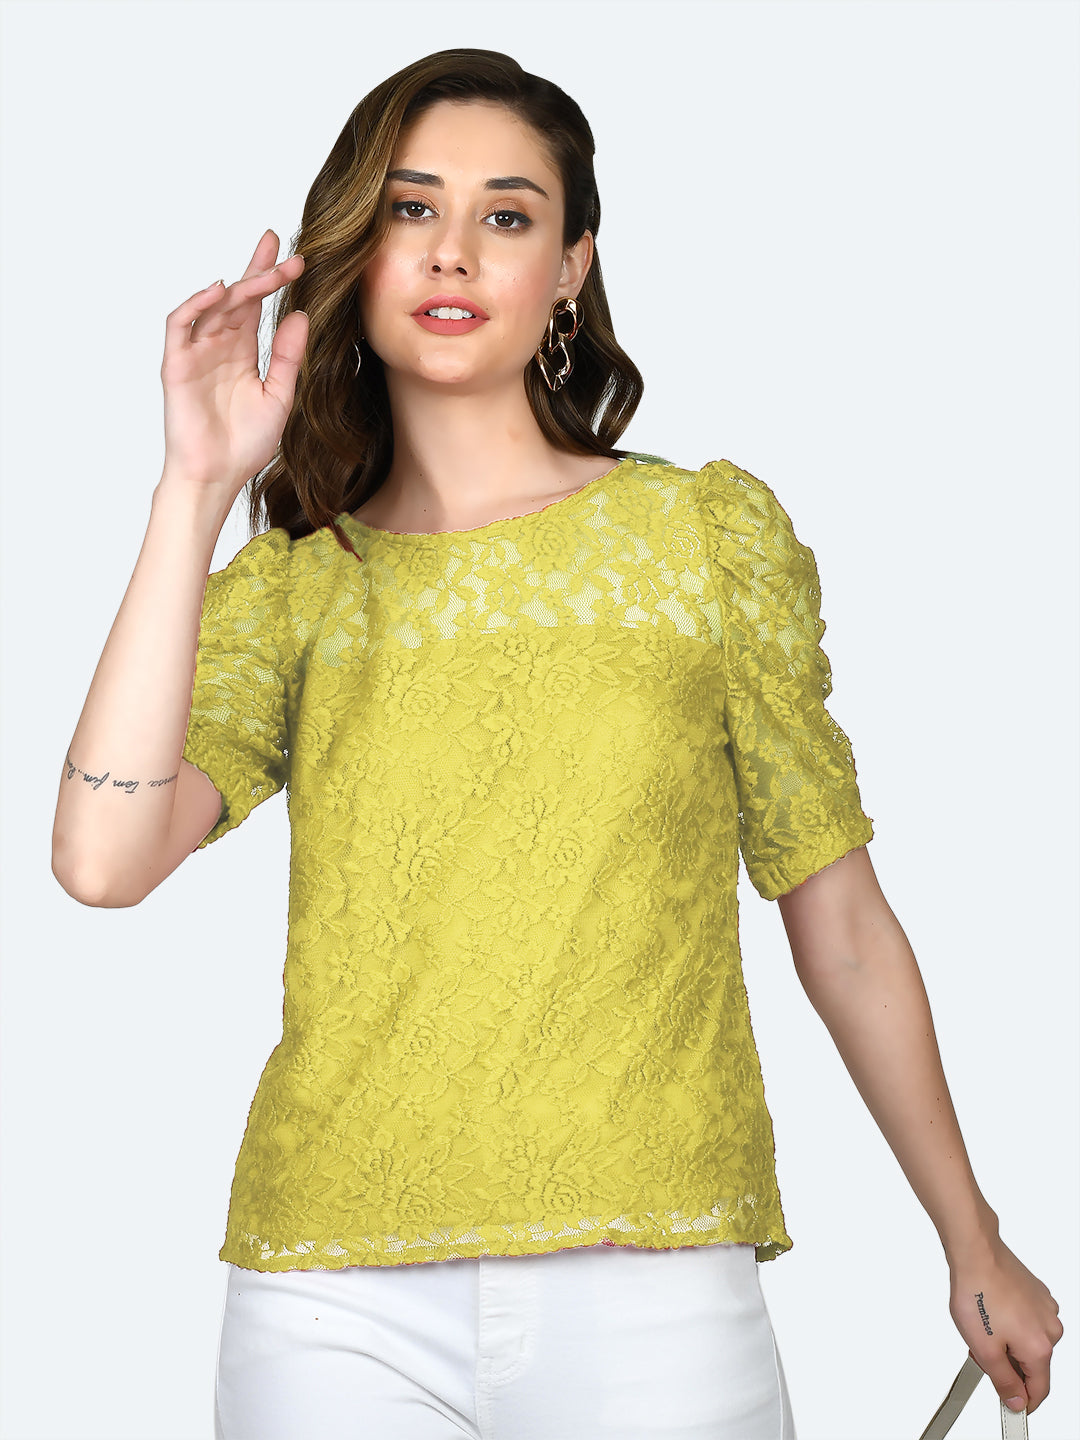 Yellow-Lace-Round-Neck-Top-VT05061_113-Yellow-2